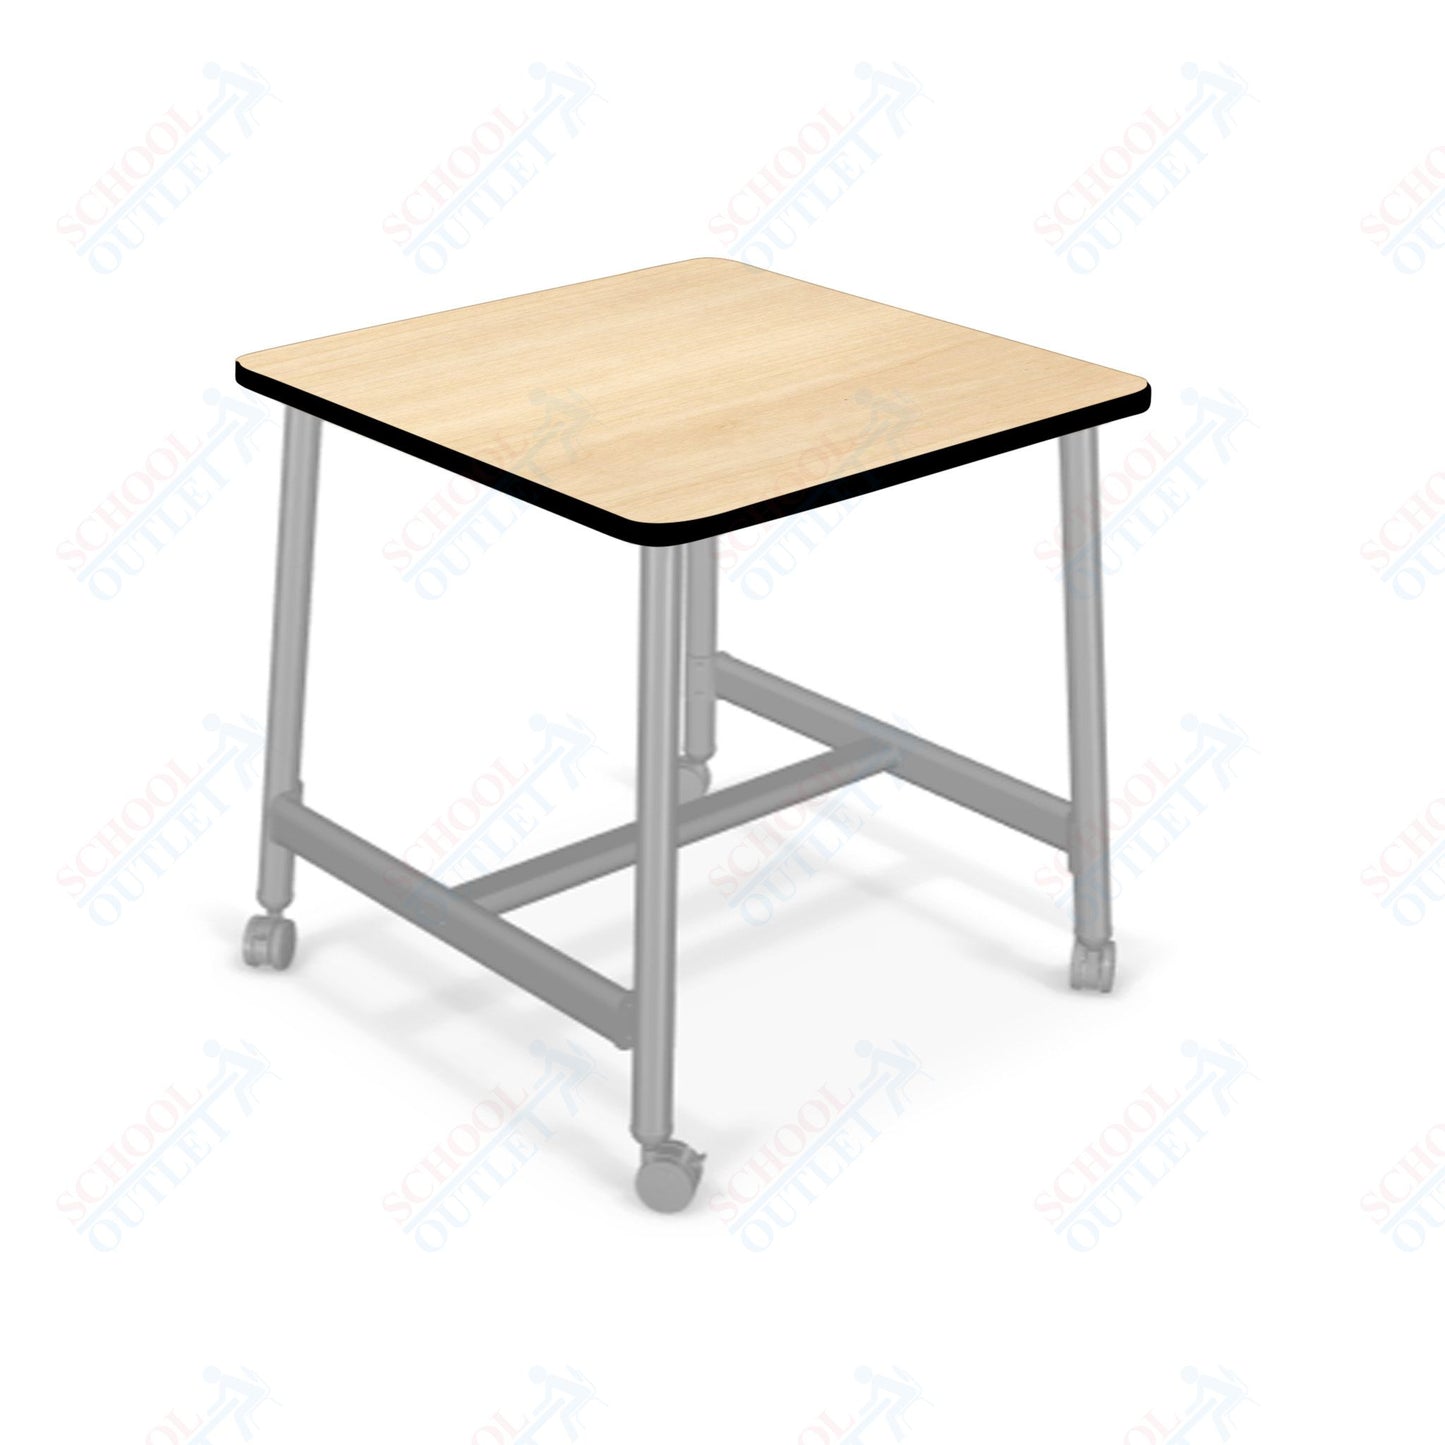 Mooreco Akt Table – 36" Square, Laminate or Butcher Block Top, Fixed Height Available in 29"H, 36"H, or 42"H